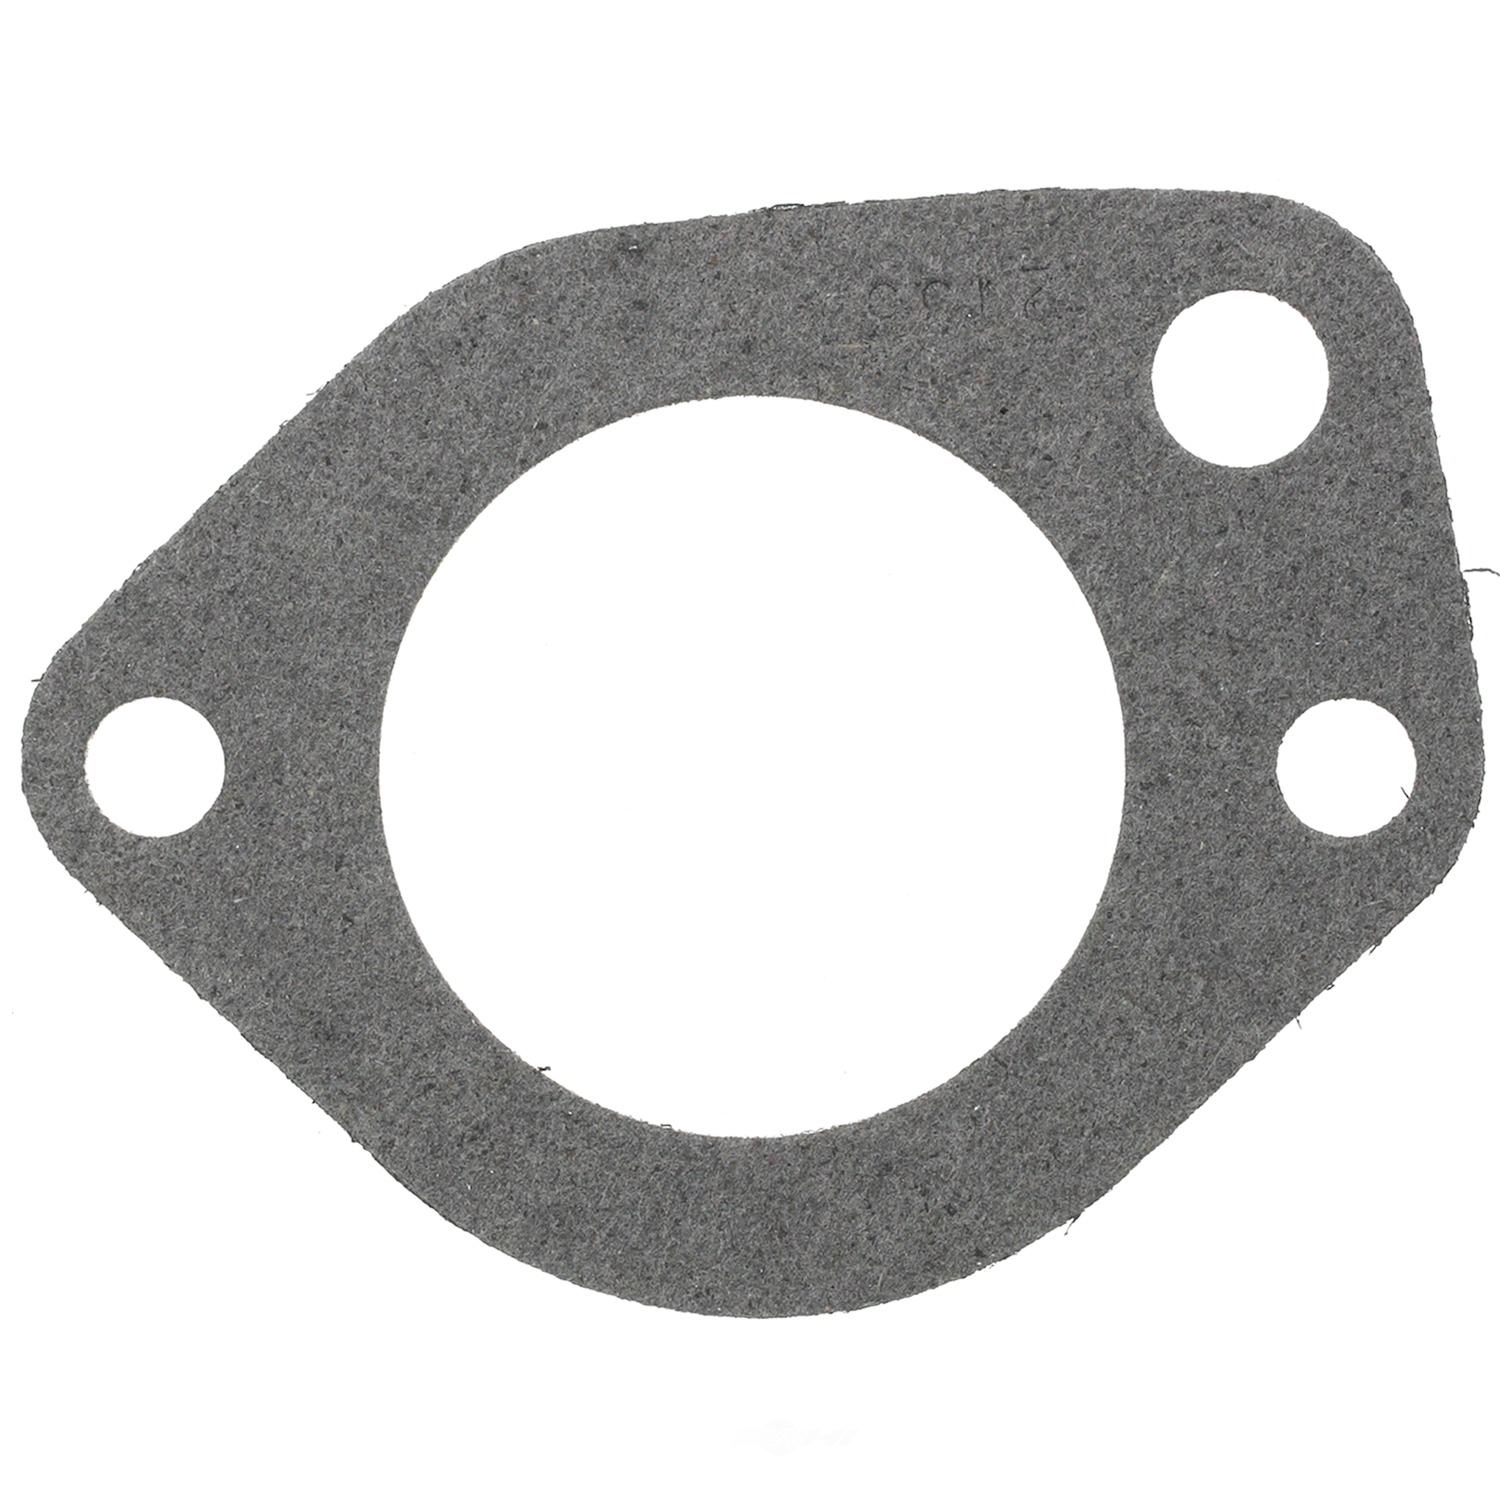 STANT - Thermostat Gasket(1 Pack) - STN 27135